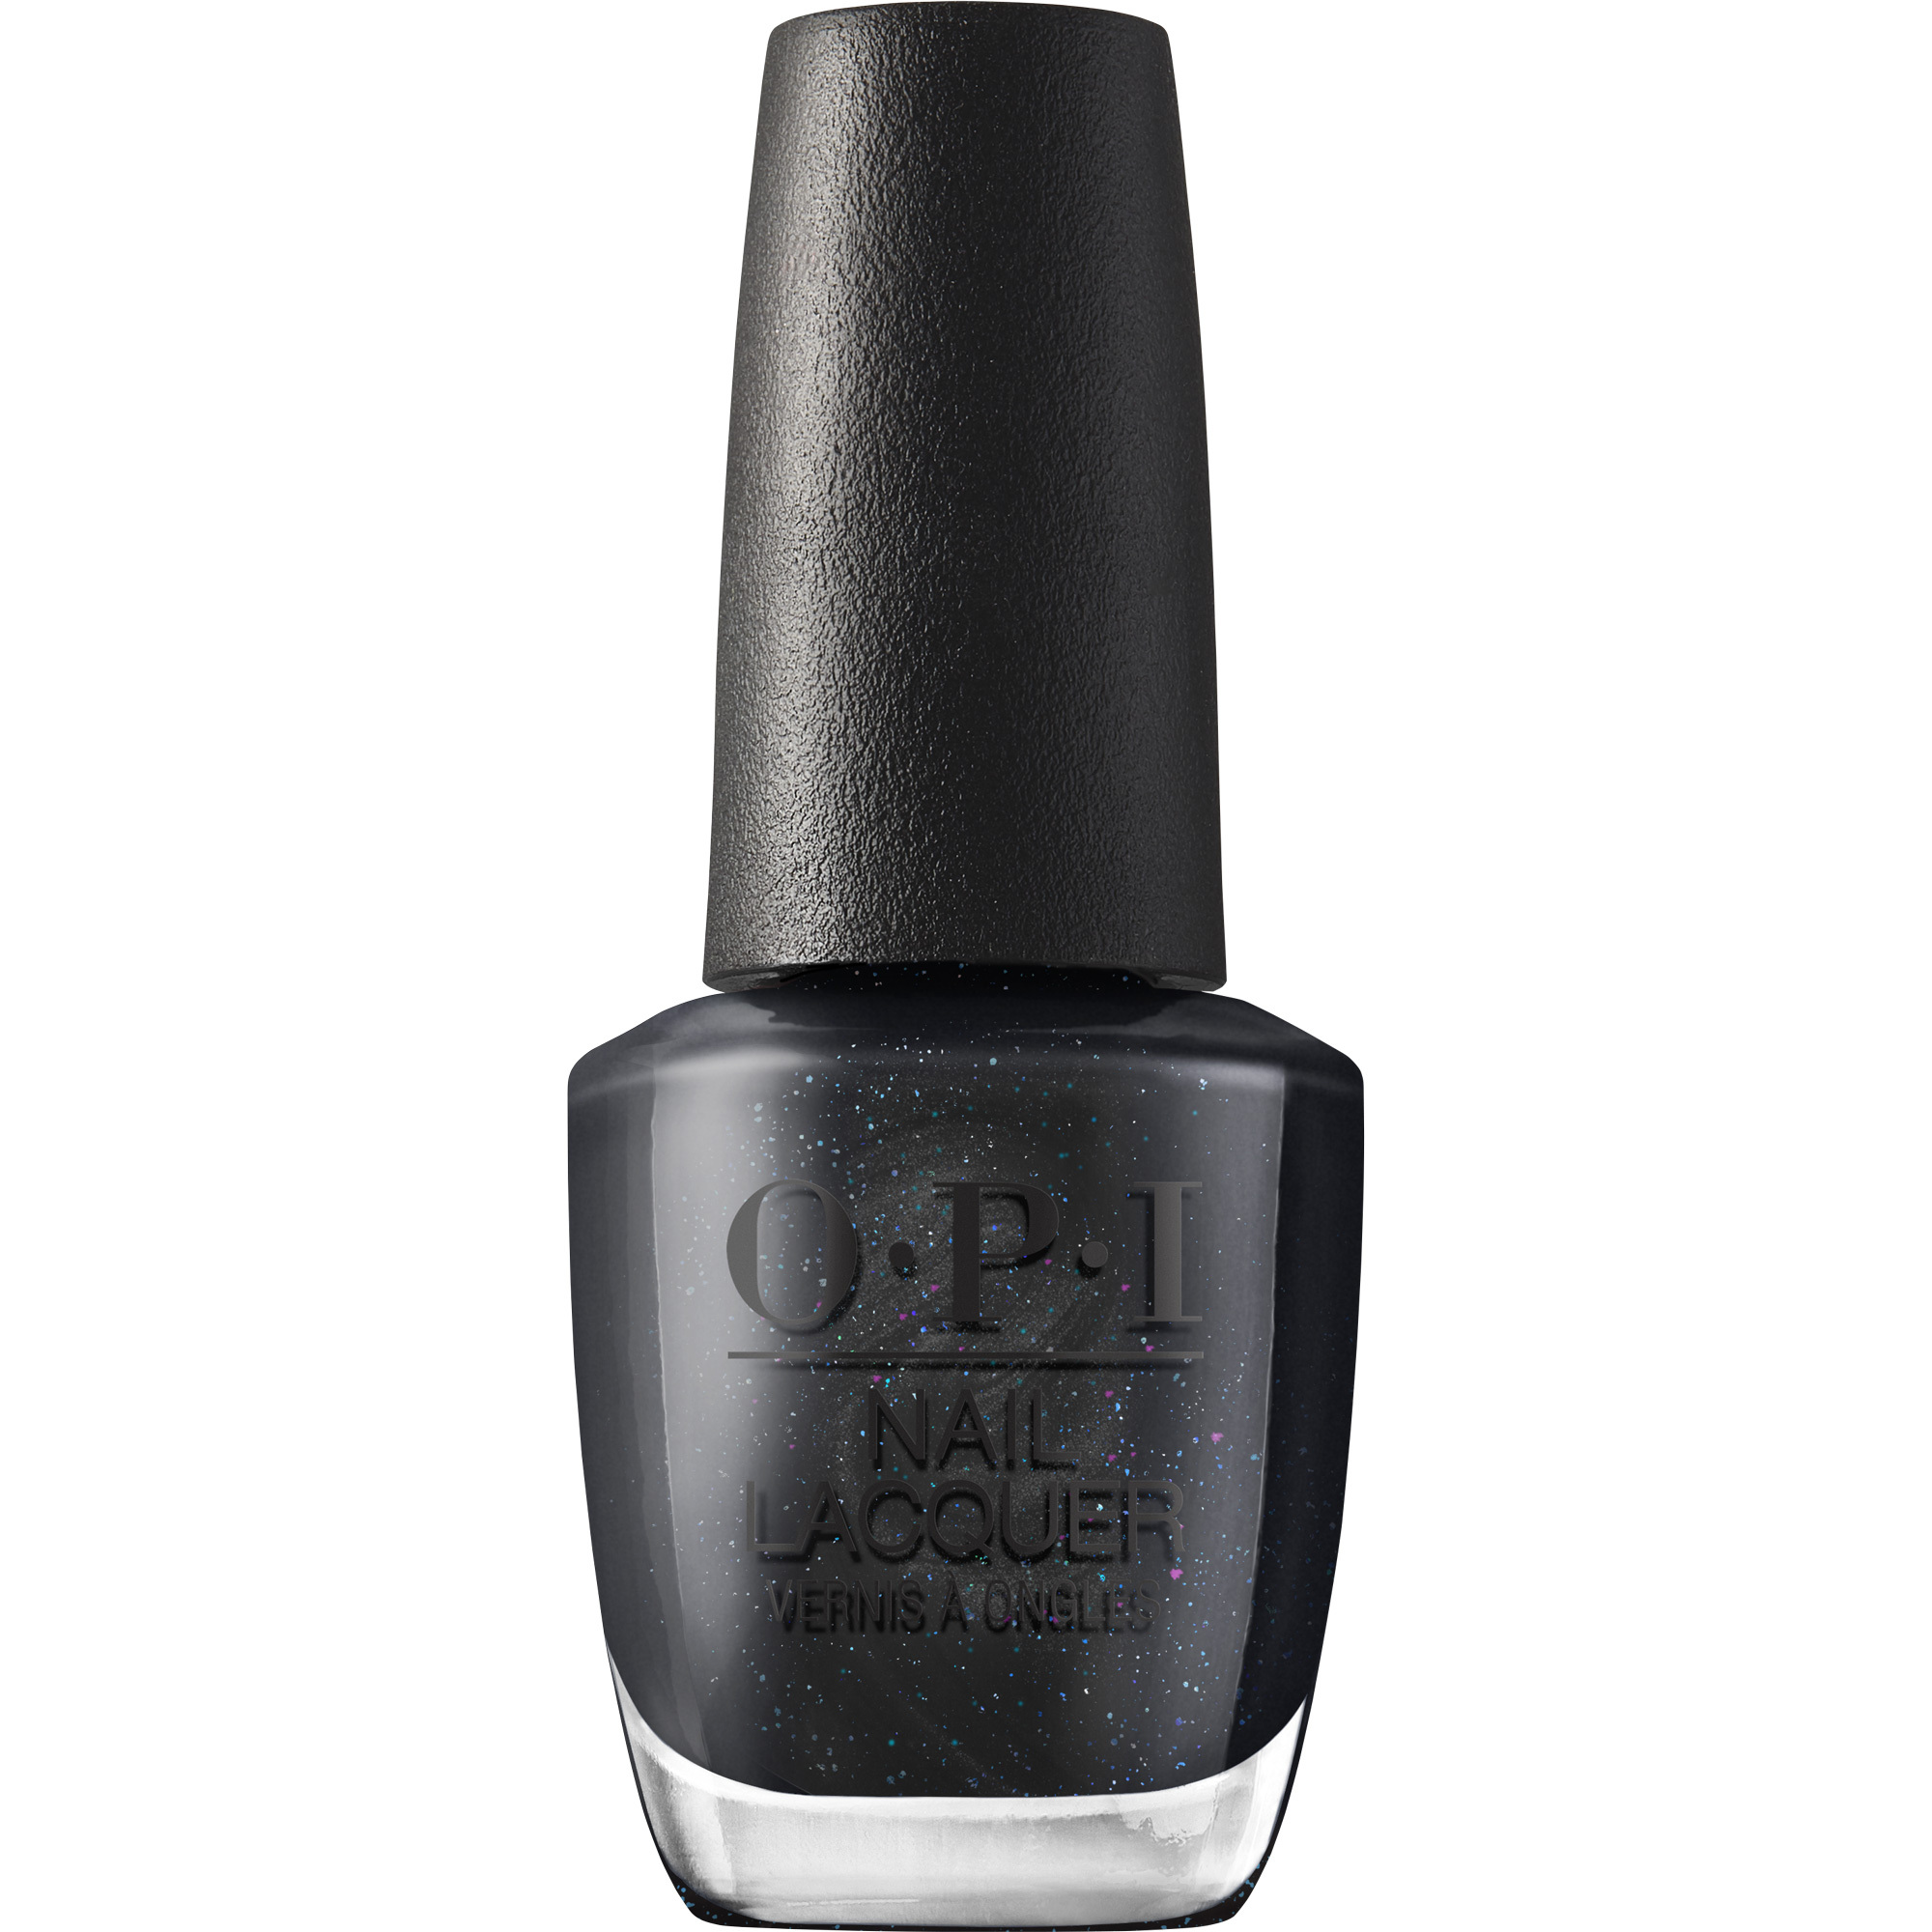 OPI Fall Wonders: Cave the Way 0.5oz